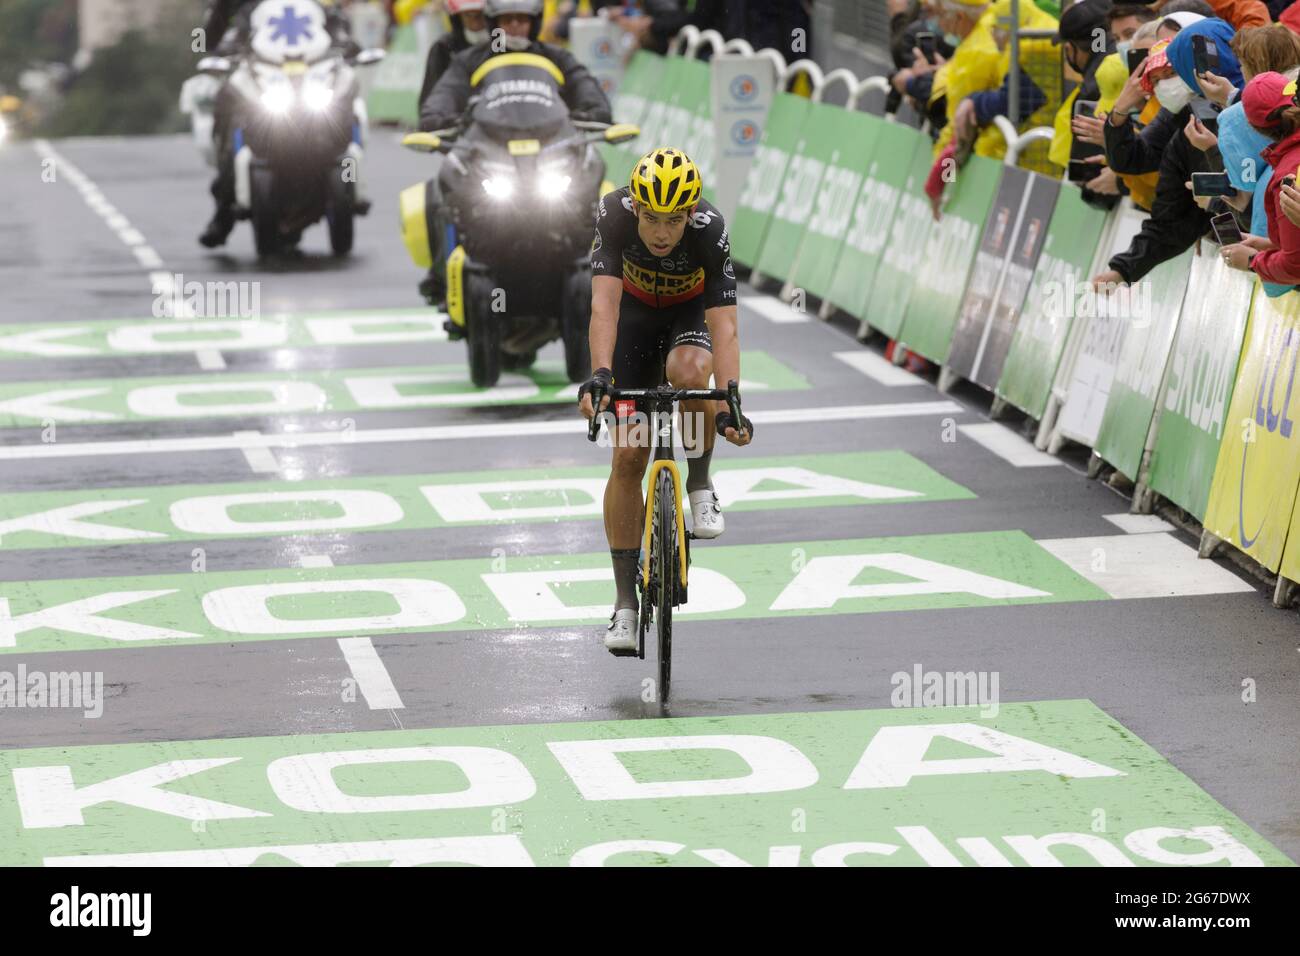 Le Grand-Bornand, France. 03 July 2021. Wout Van Aert crosses the finish line of the 8th stage of the Tour de France. Julian Elliott News Photography Credit: Julian Elliott/Alamy Live News Stock Photo